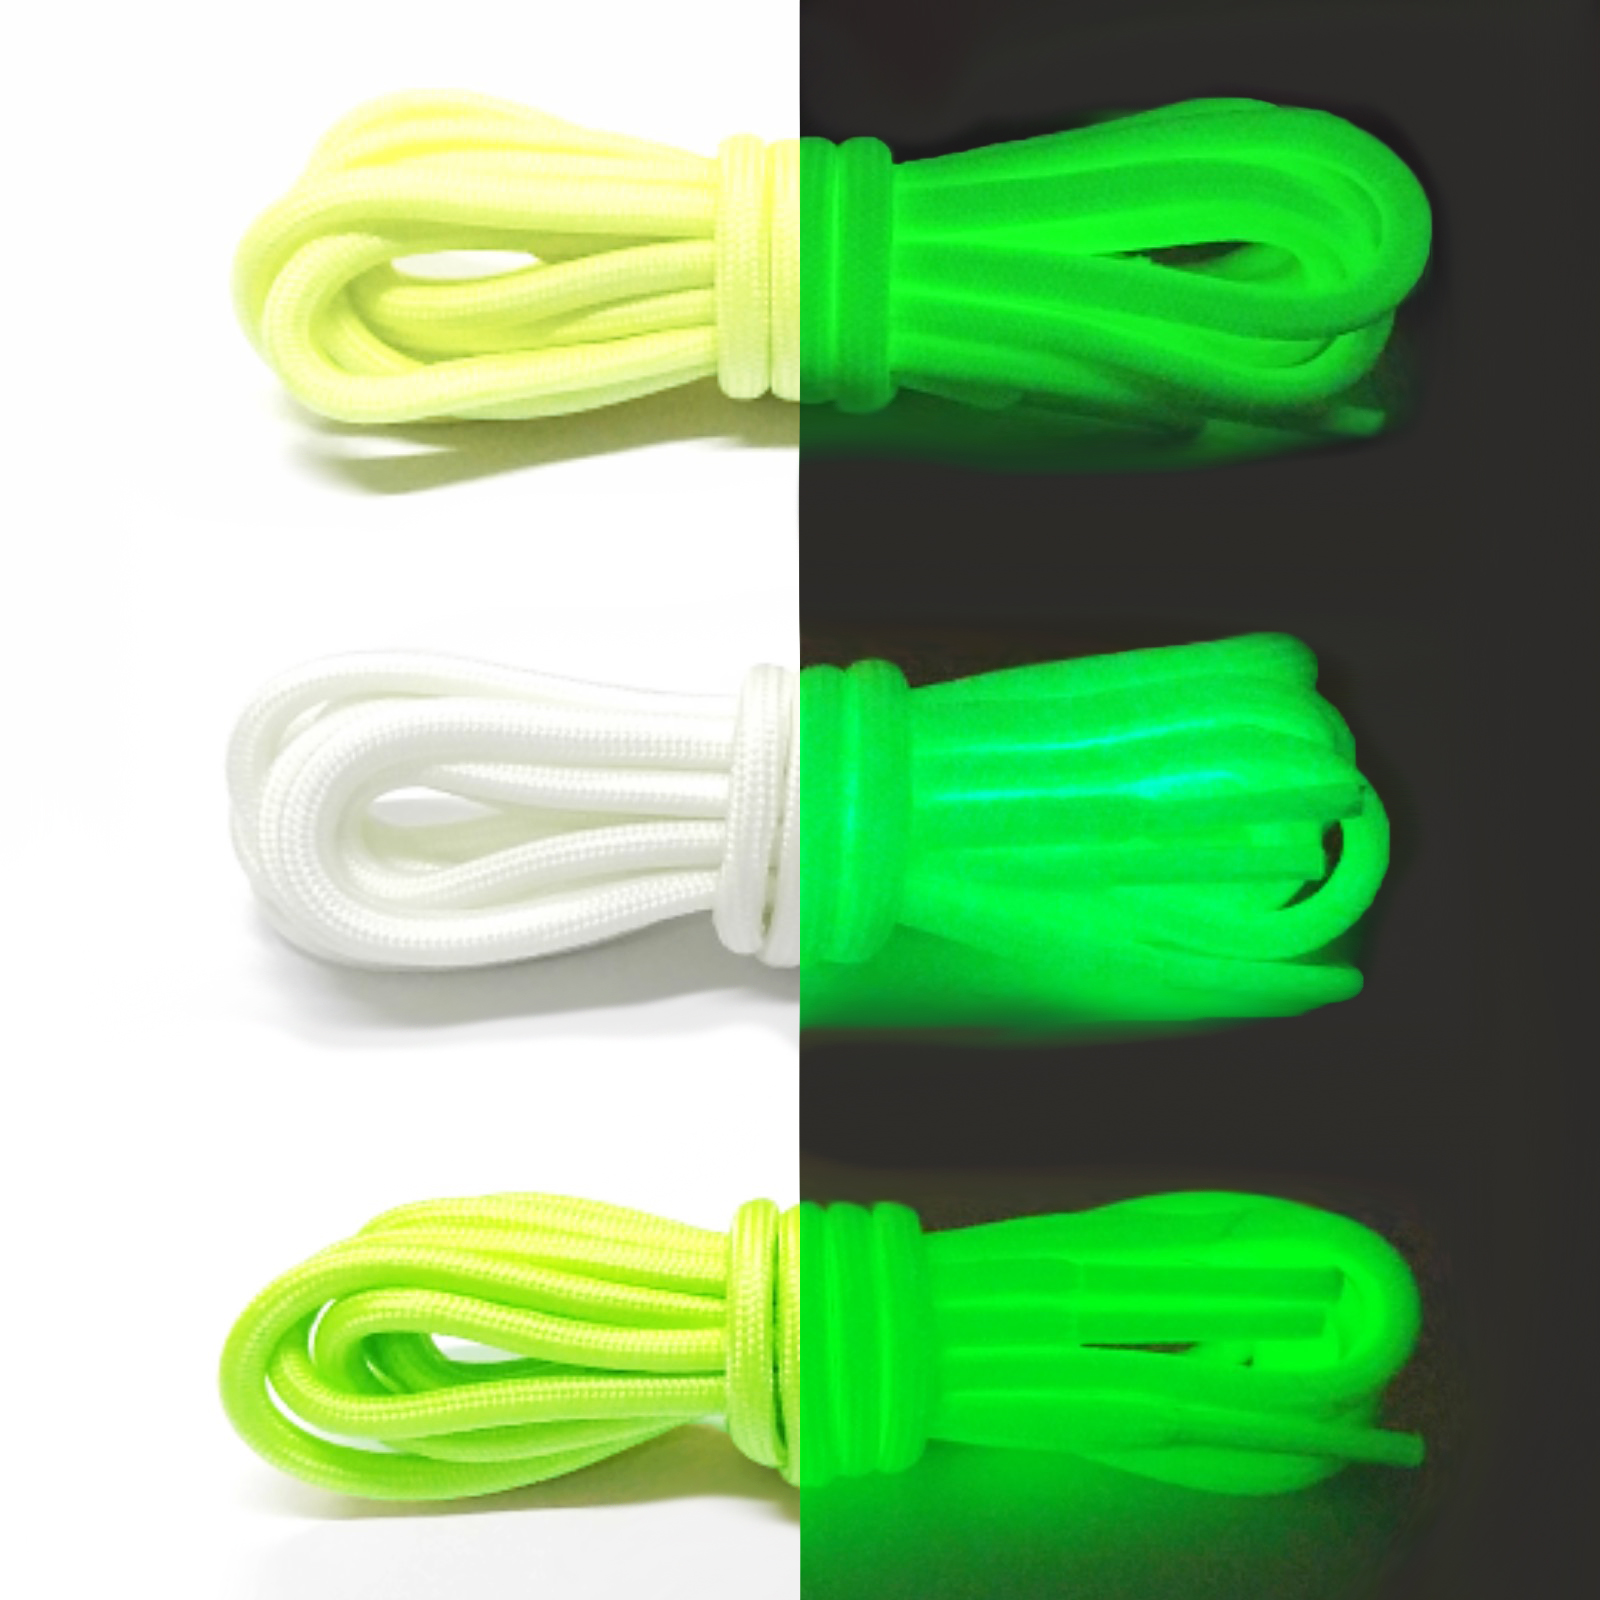 yeezy glow in the dark laces